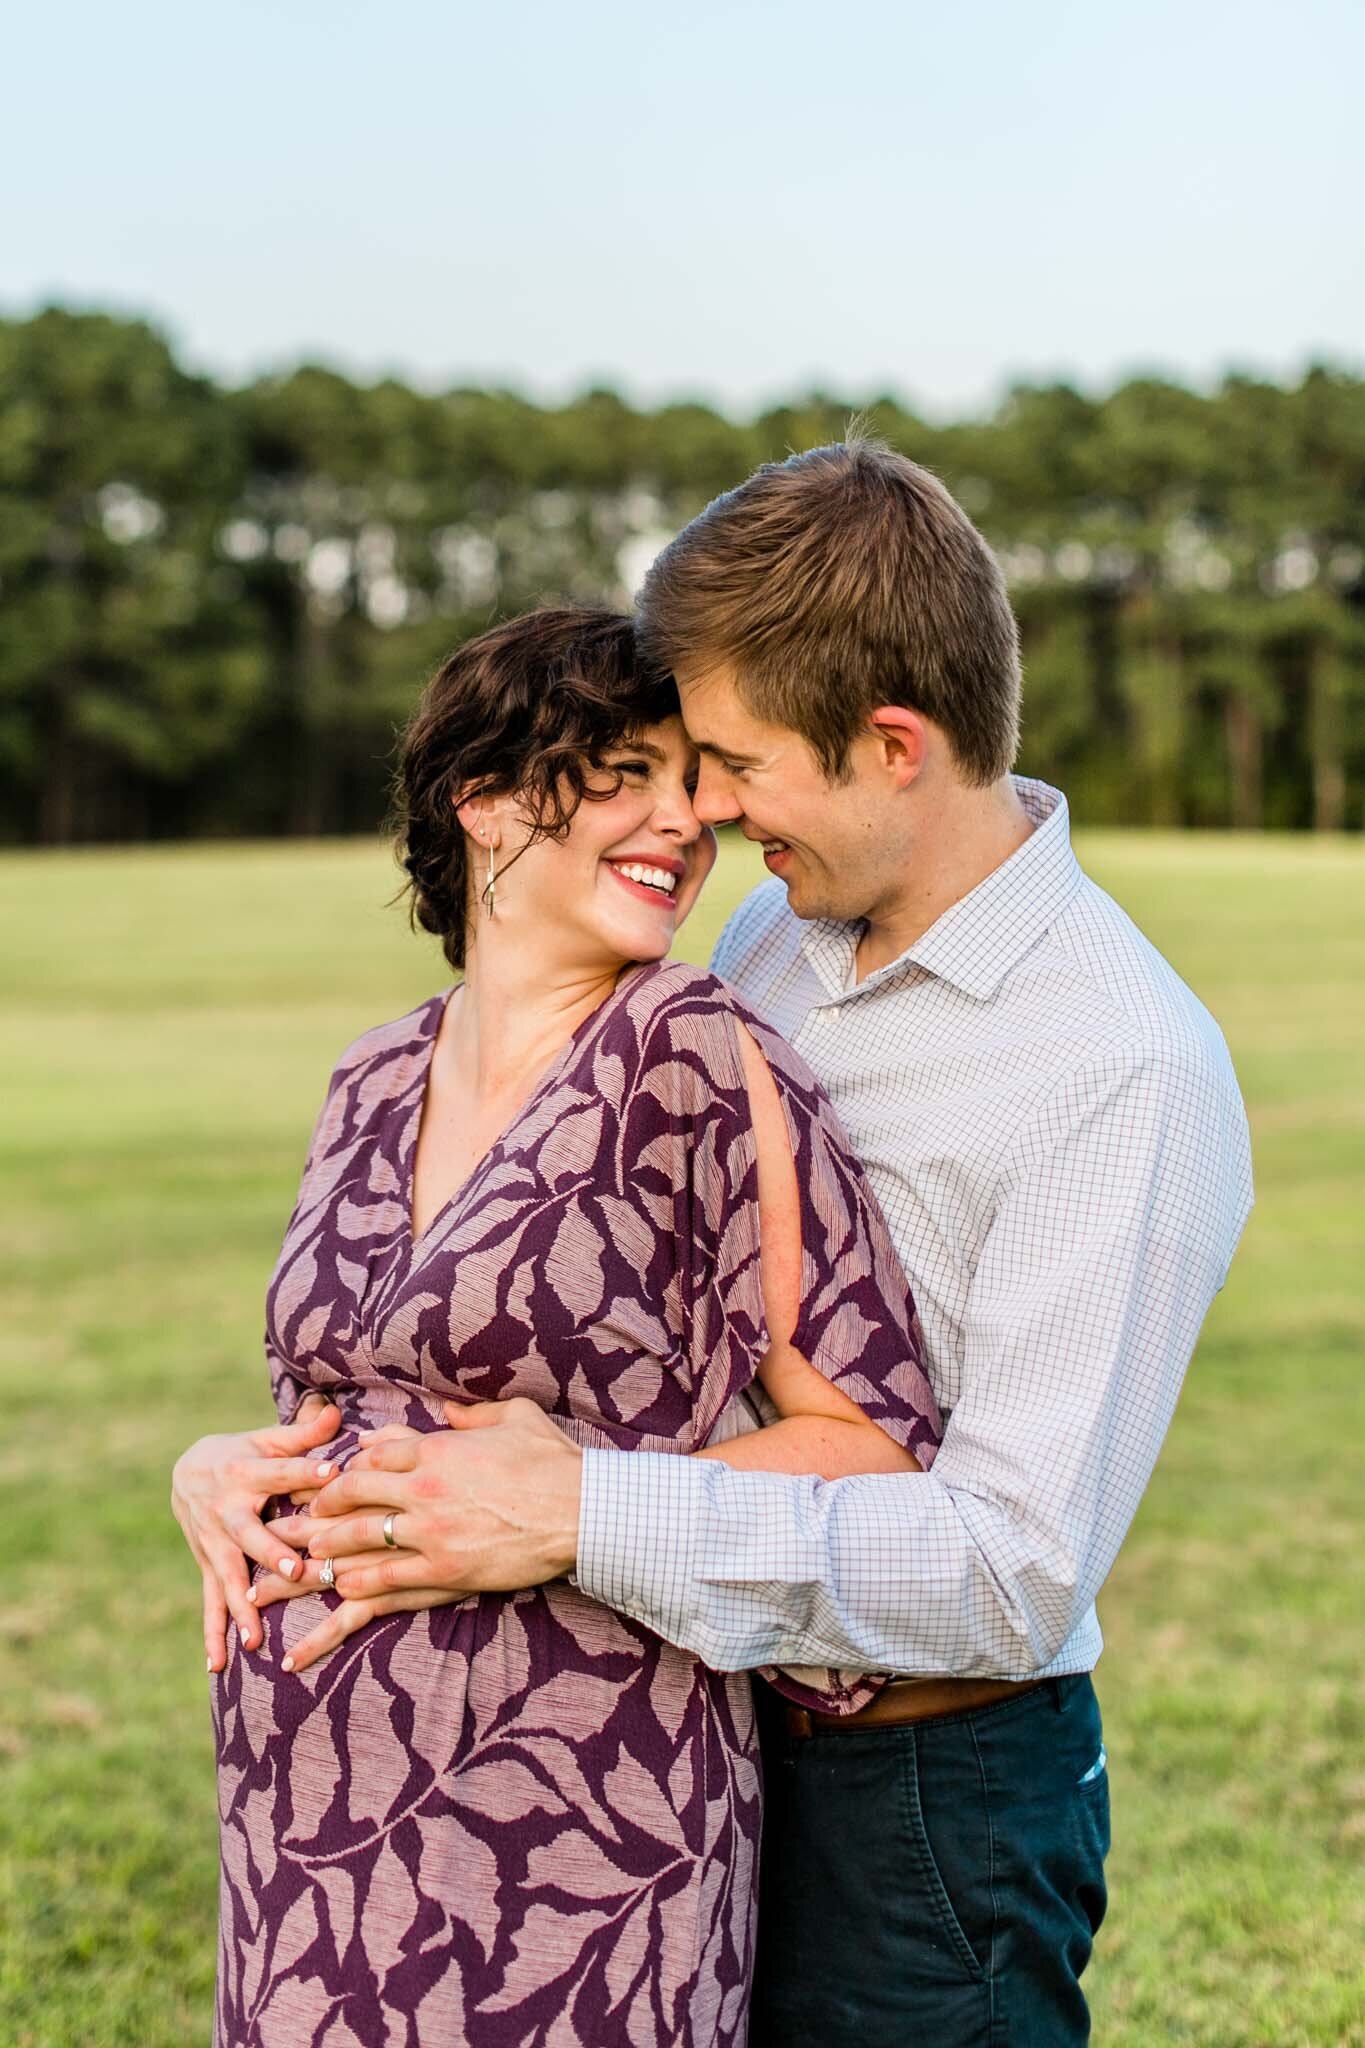 Raleigh Maternity Photography at Dix Park | By G. Lin Photography | Couple smiling together in open field